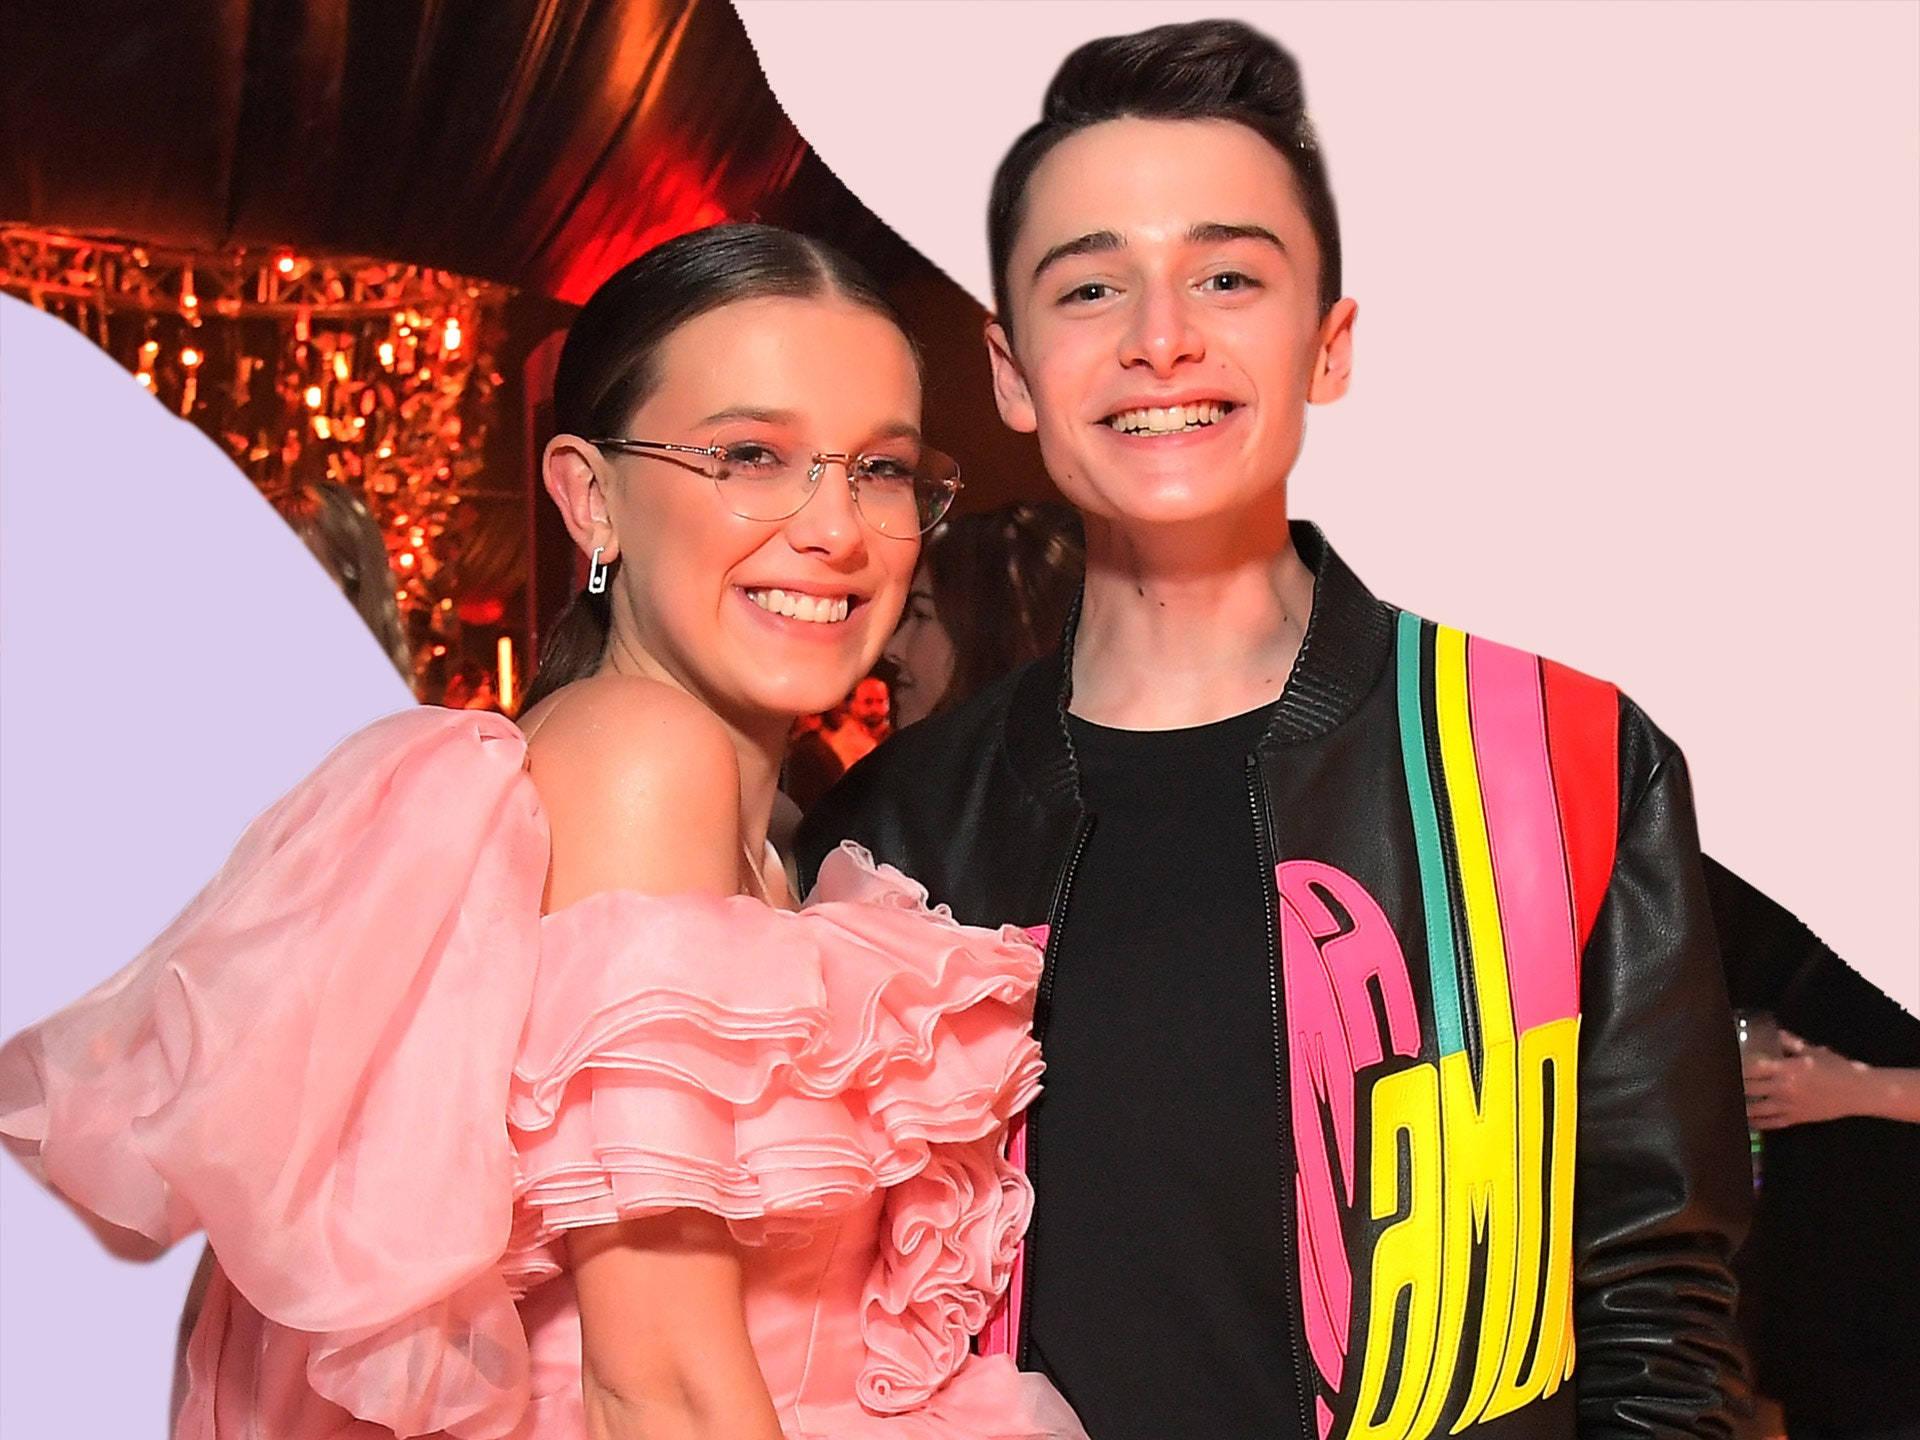 Are millie and noah dating